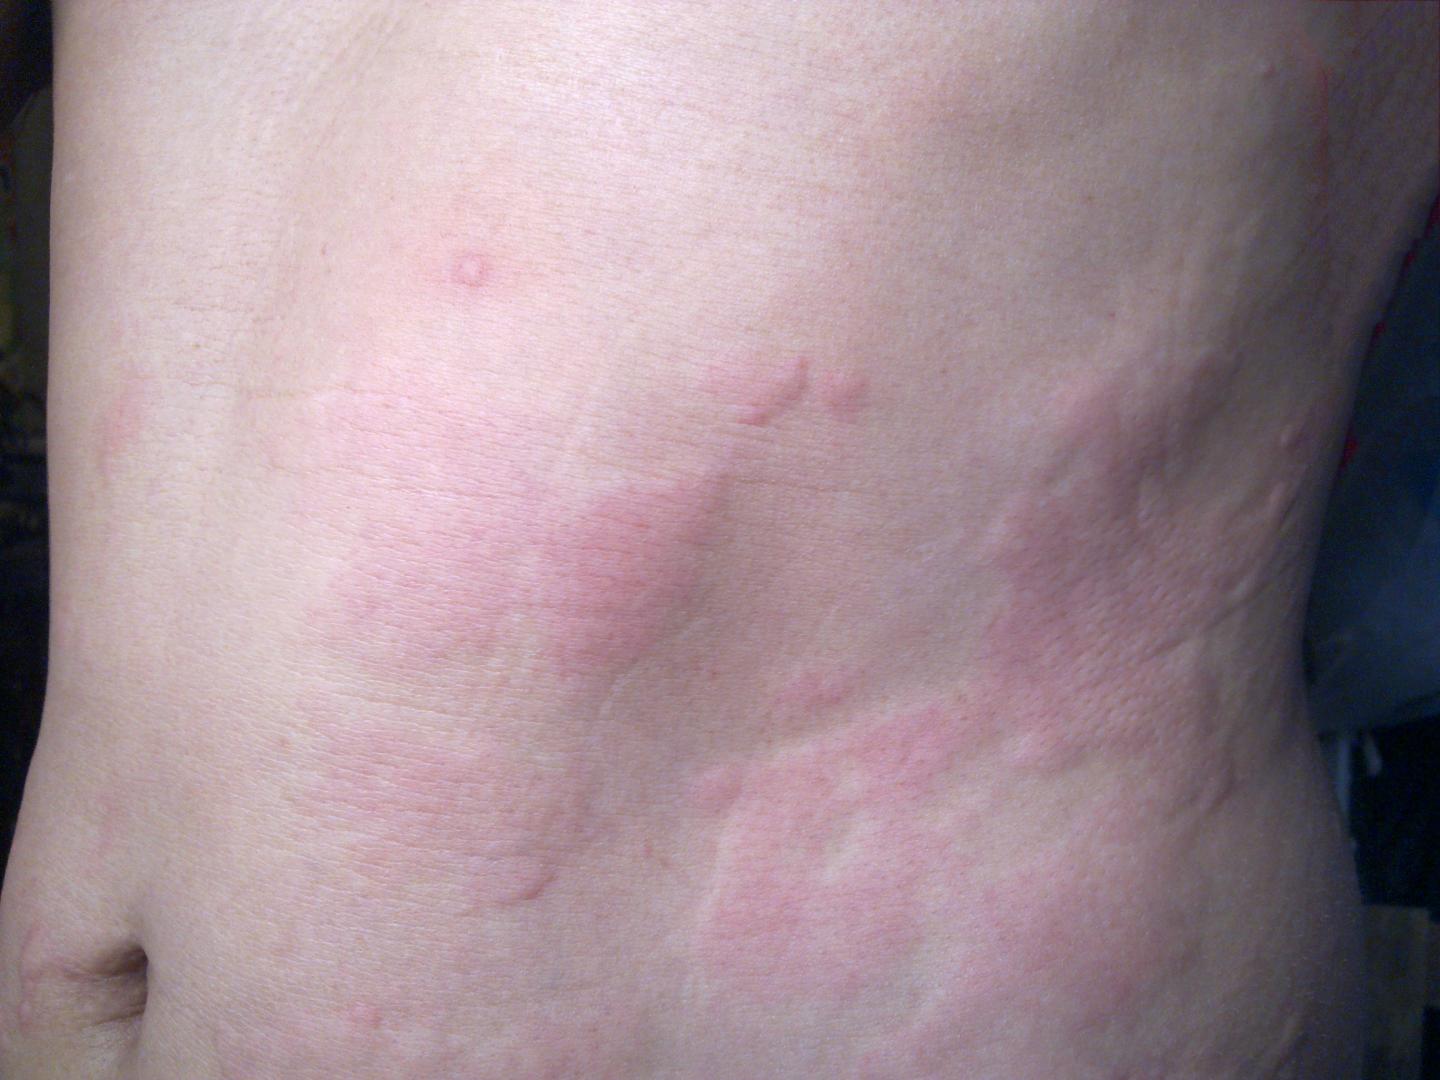 Steroids Do Not Work to Control Itching From Hives